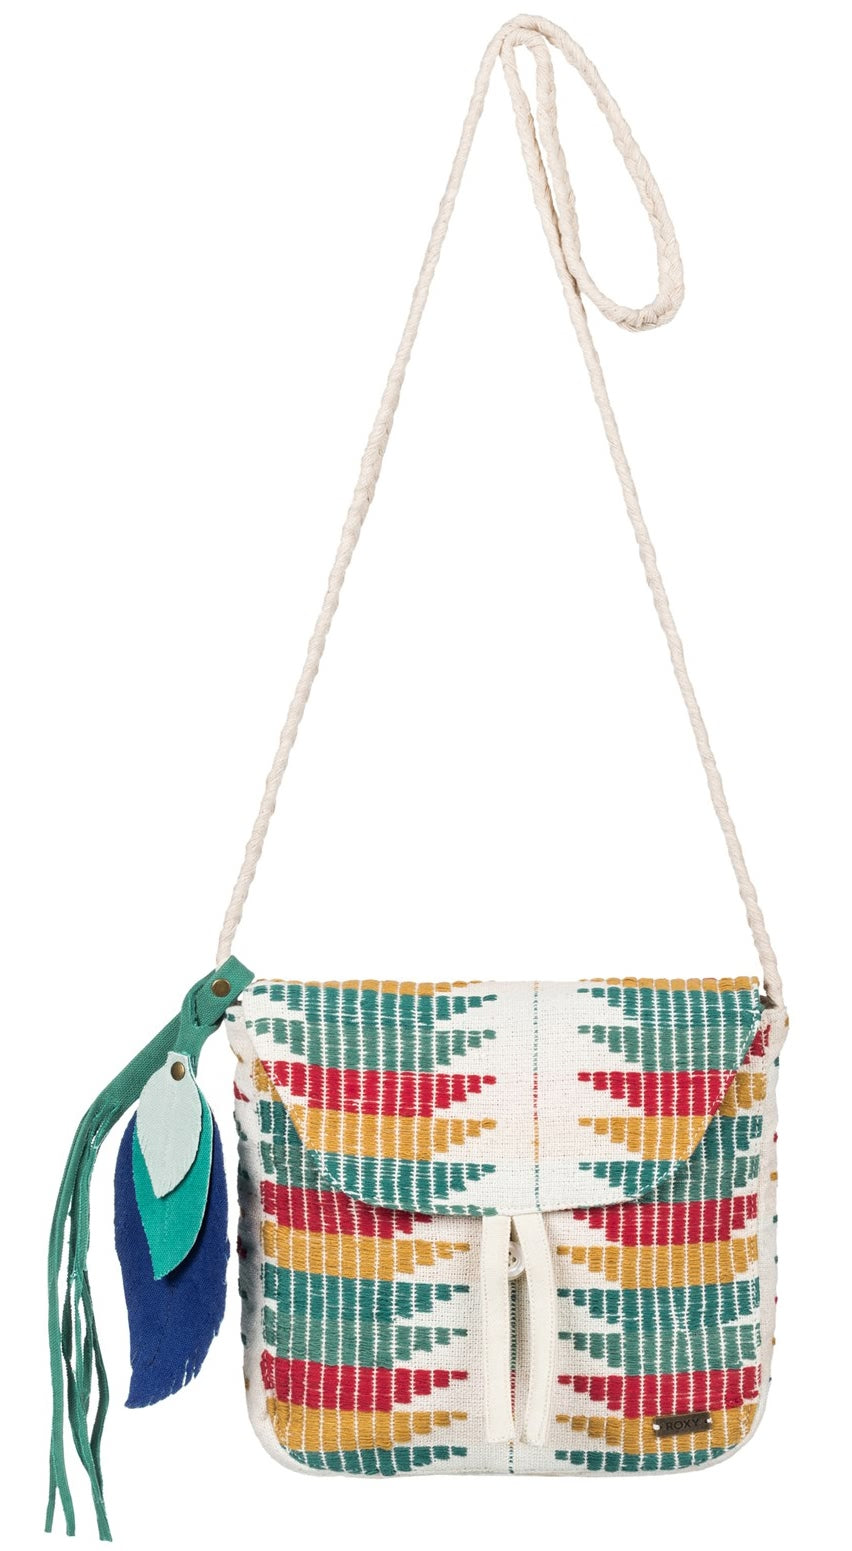 Roxy Summer 2017 Womens Beach Bags & Accessories Collection